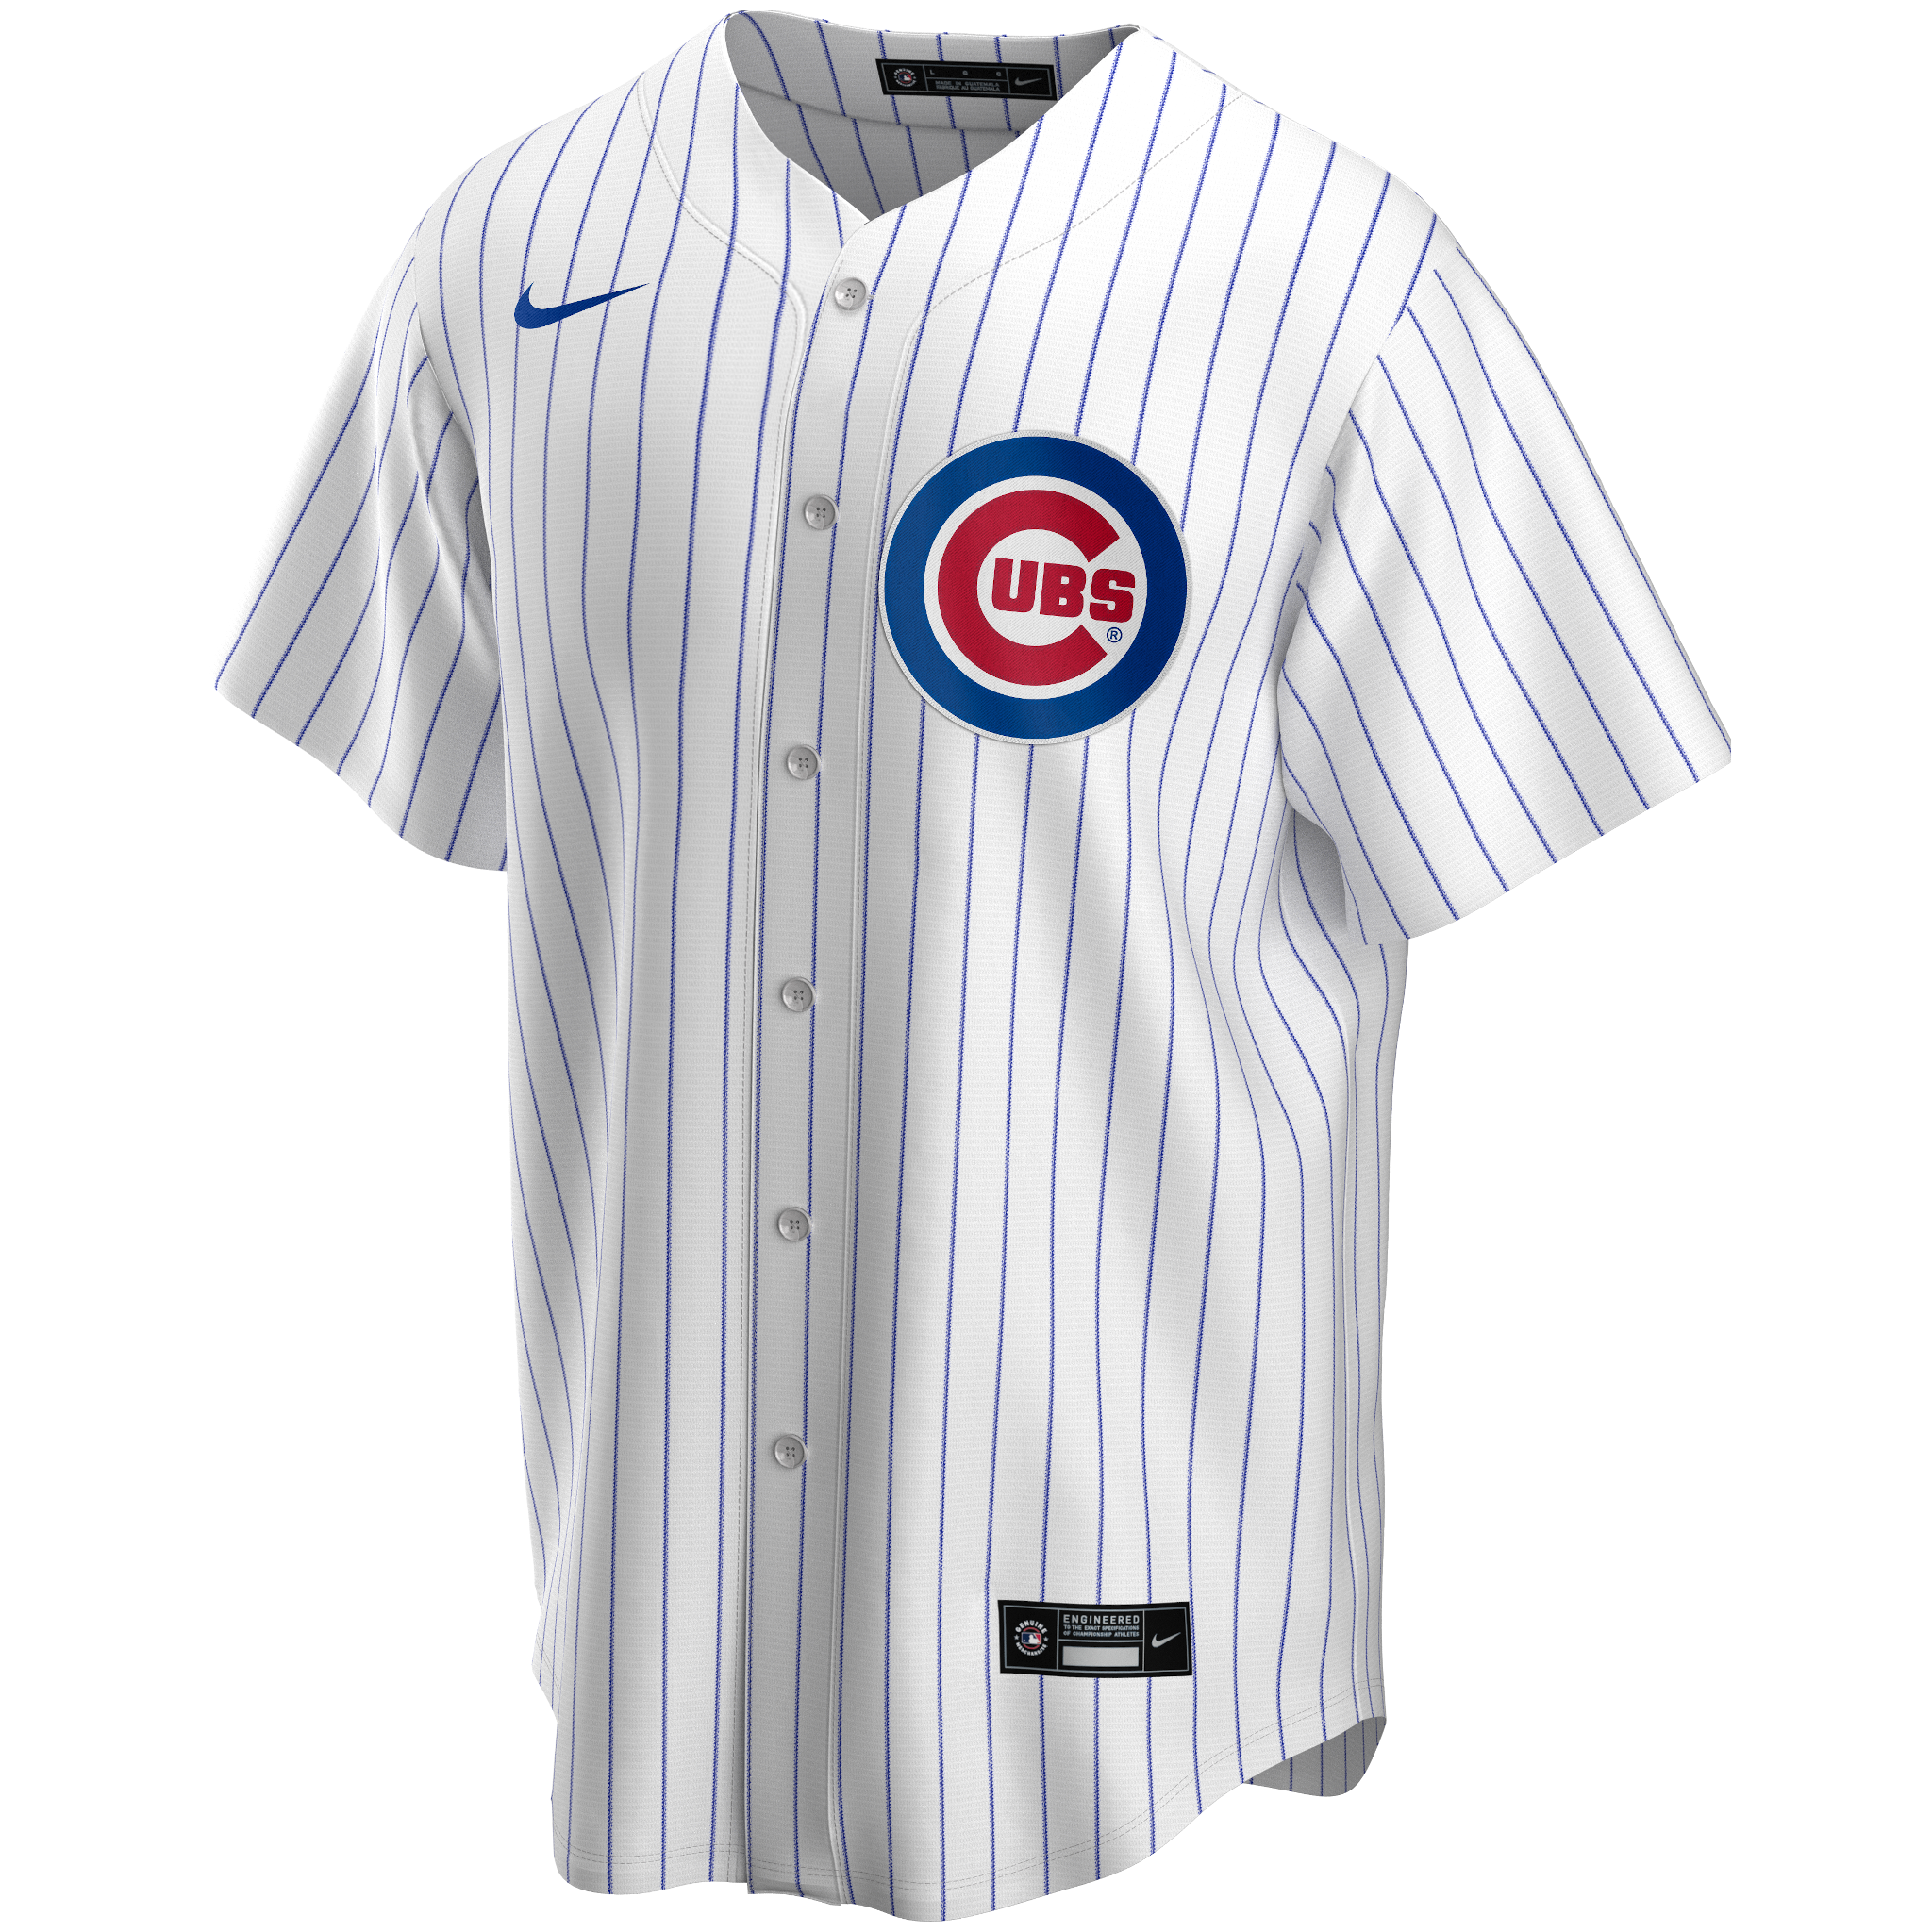 youth cubs bryant jersey